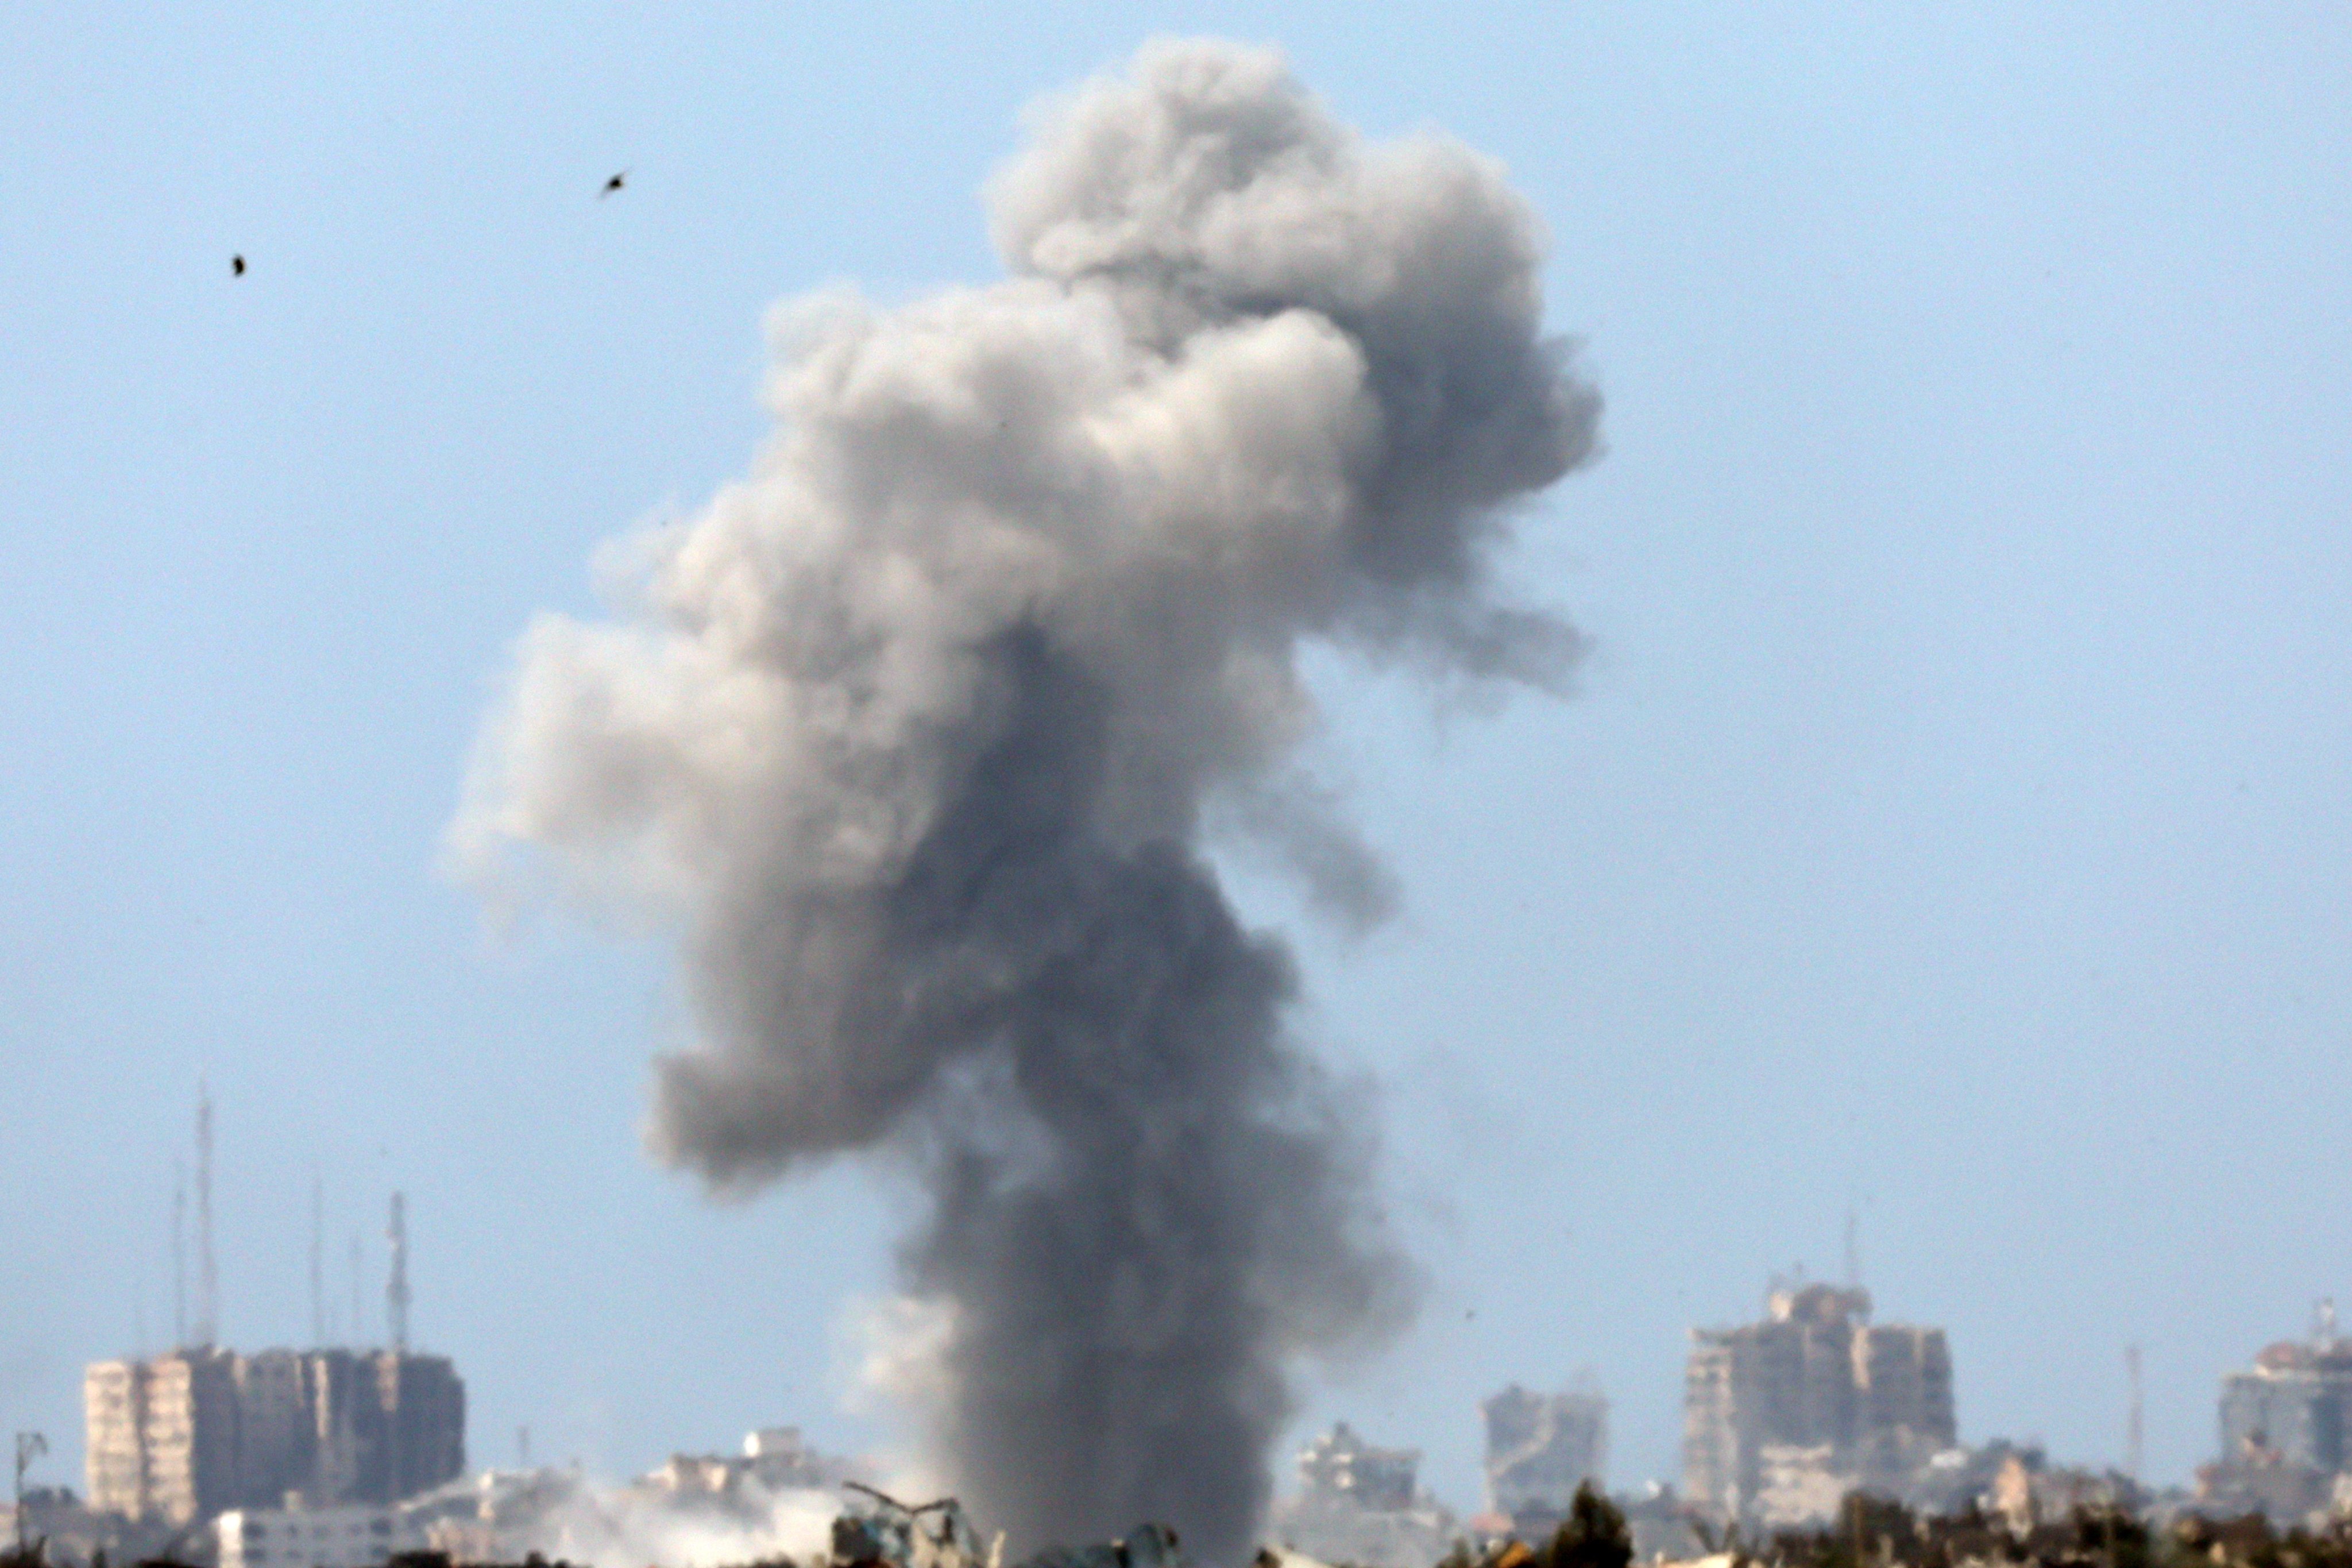 Smoke rises after an Israeli air strike in northern Gaza, as seen from the Israeli side of the border in southern Israel on Sunday. The Israeli military said on Sunday that a leading  Hamas member was killed in an air strike in Gaza on Friday. Photo: EPA-EFE